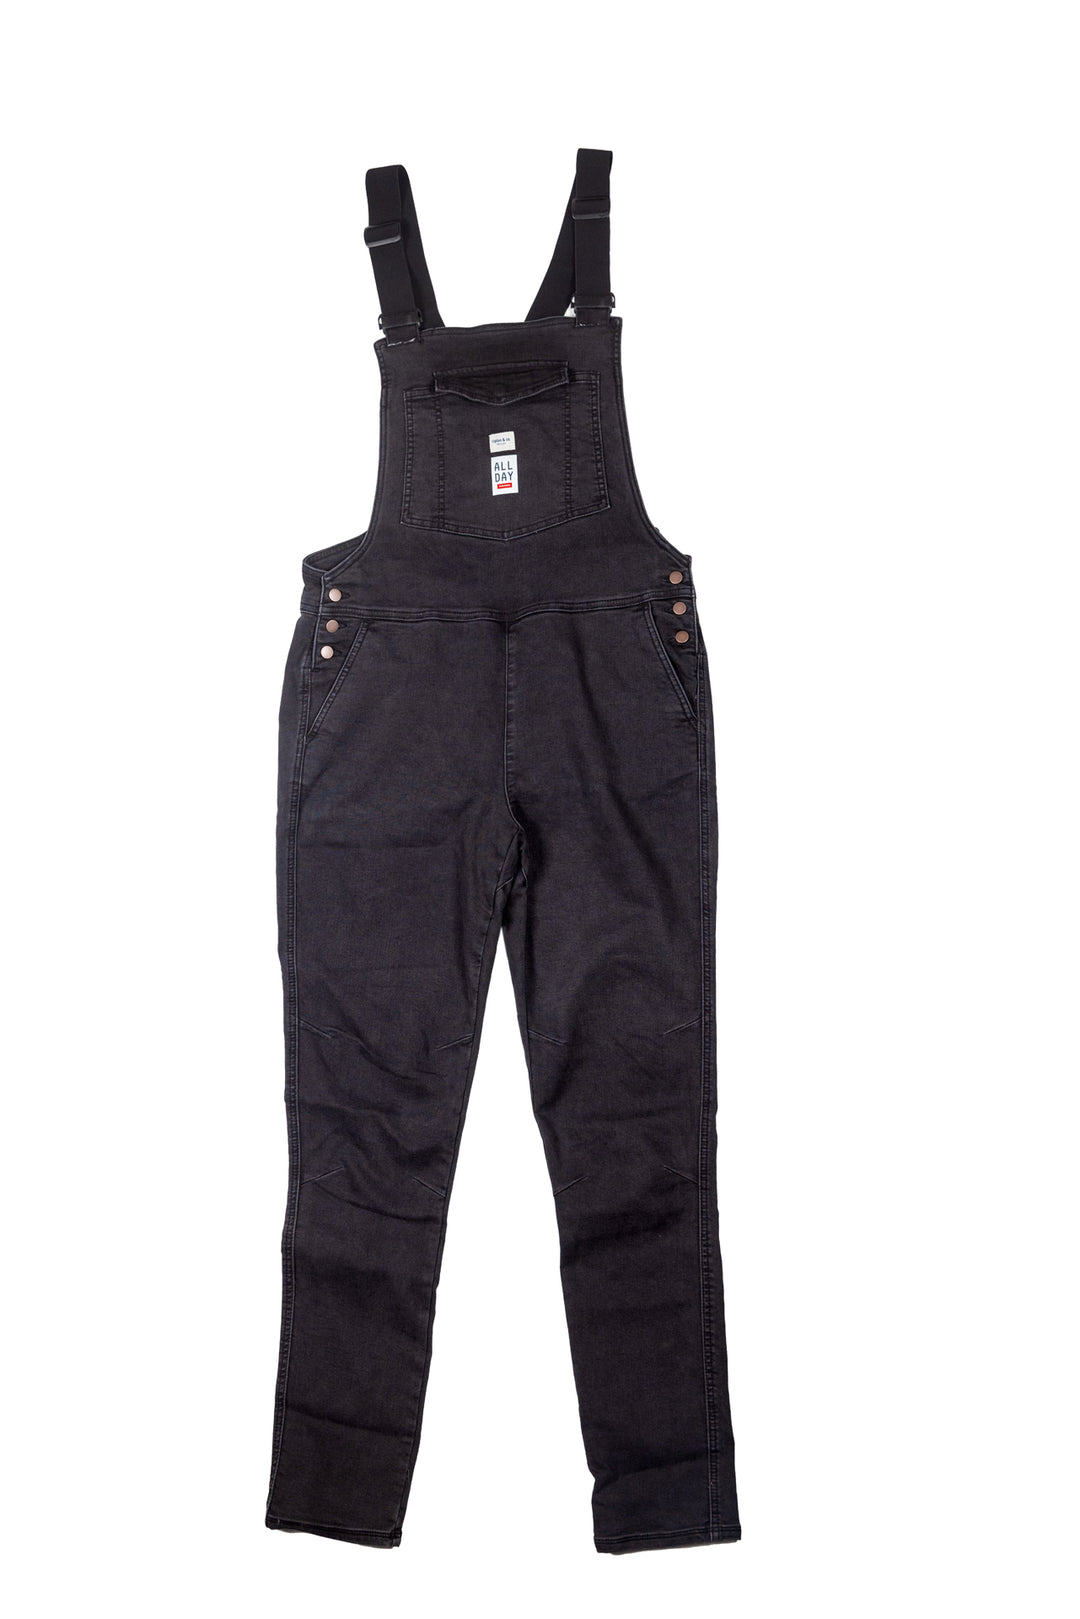 SRAM All Day Collection Ripton Diesel Overalls - Women's